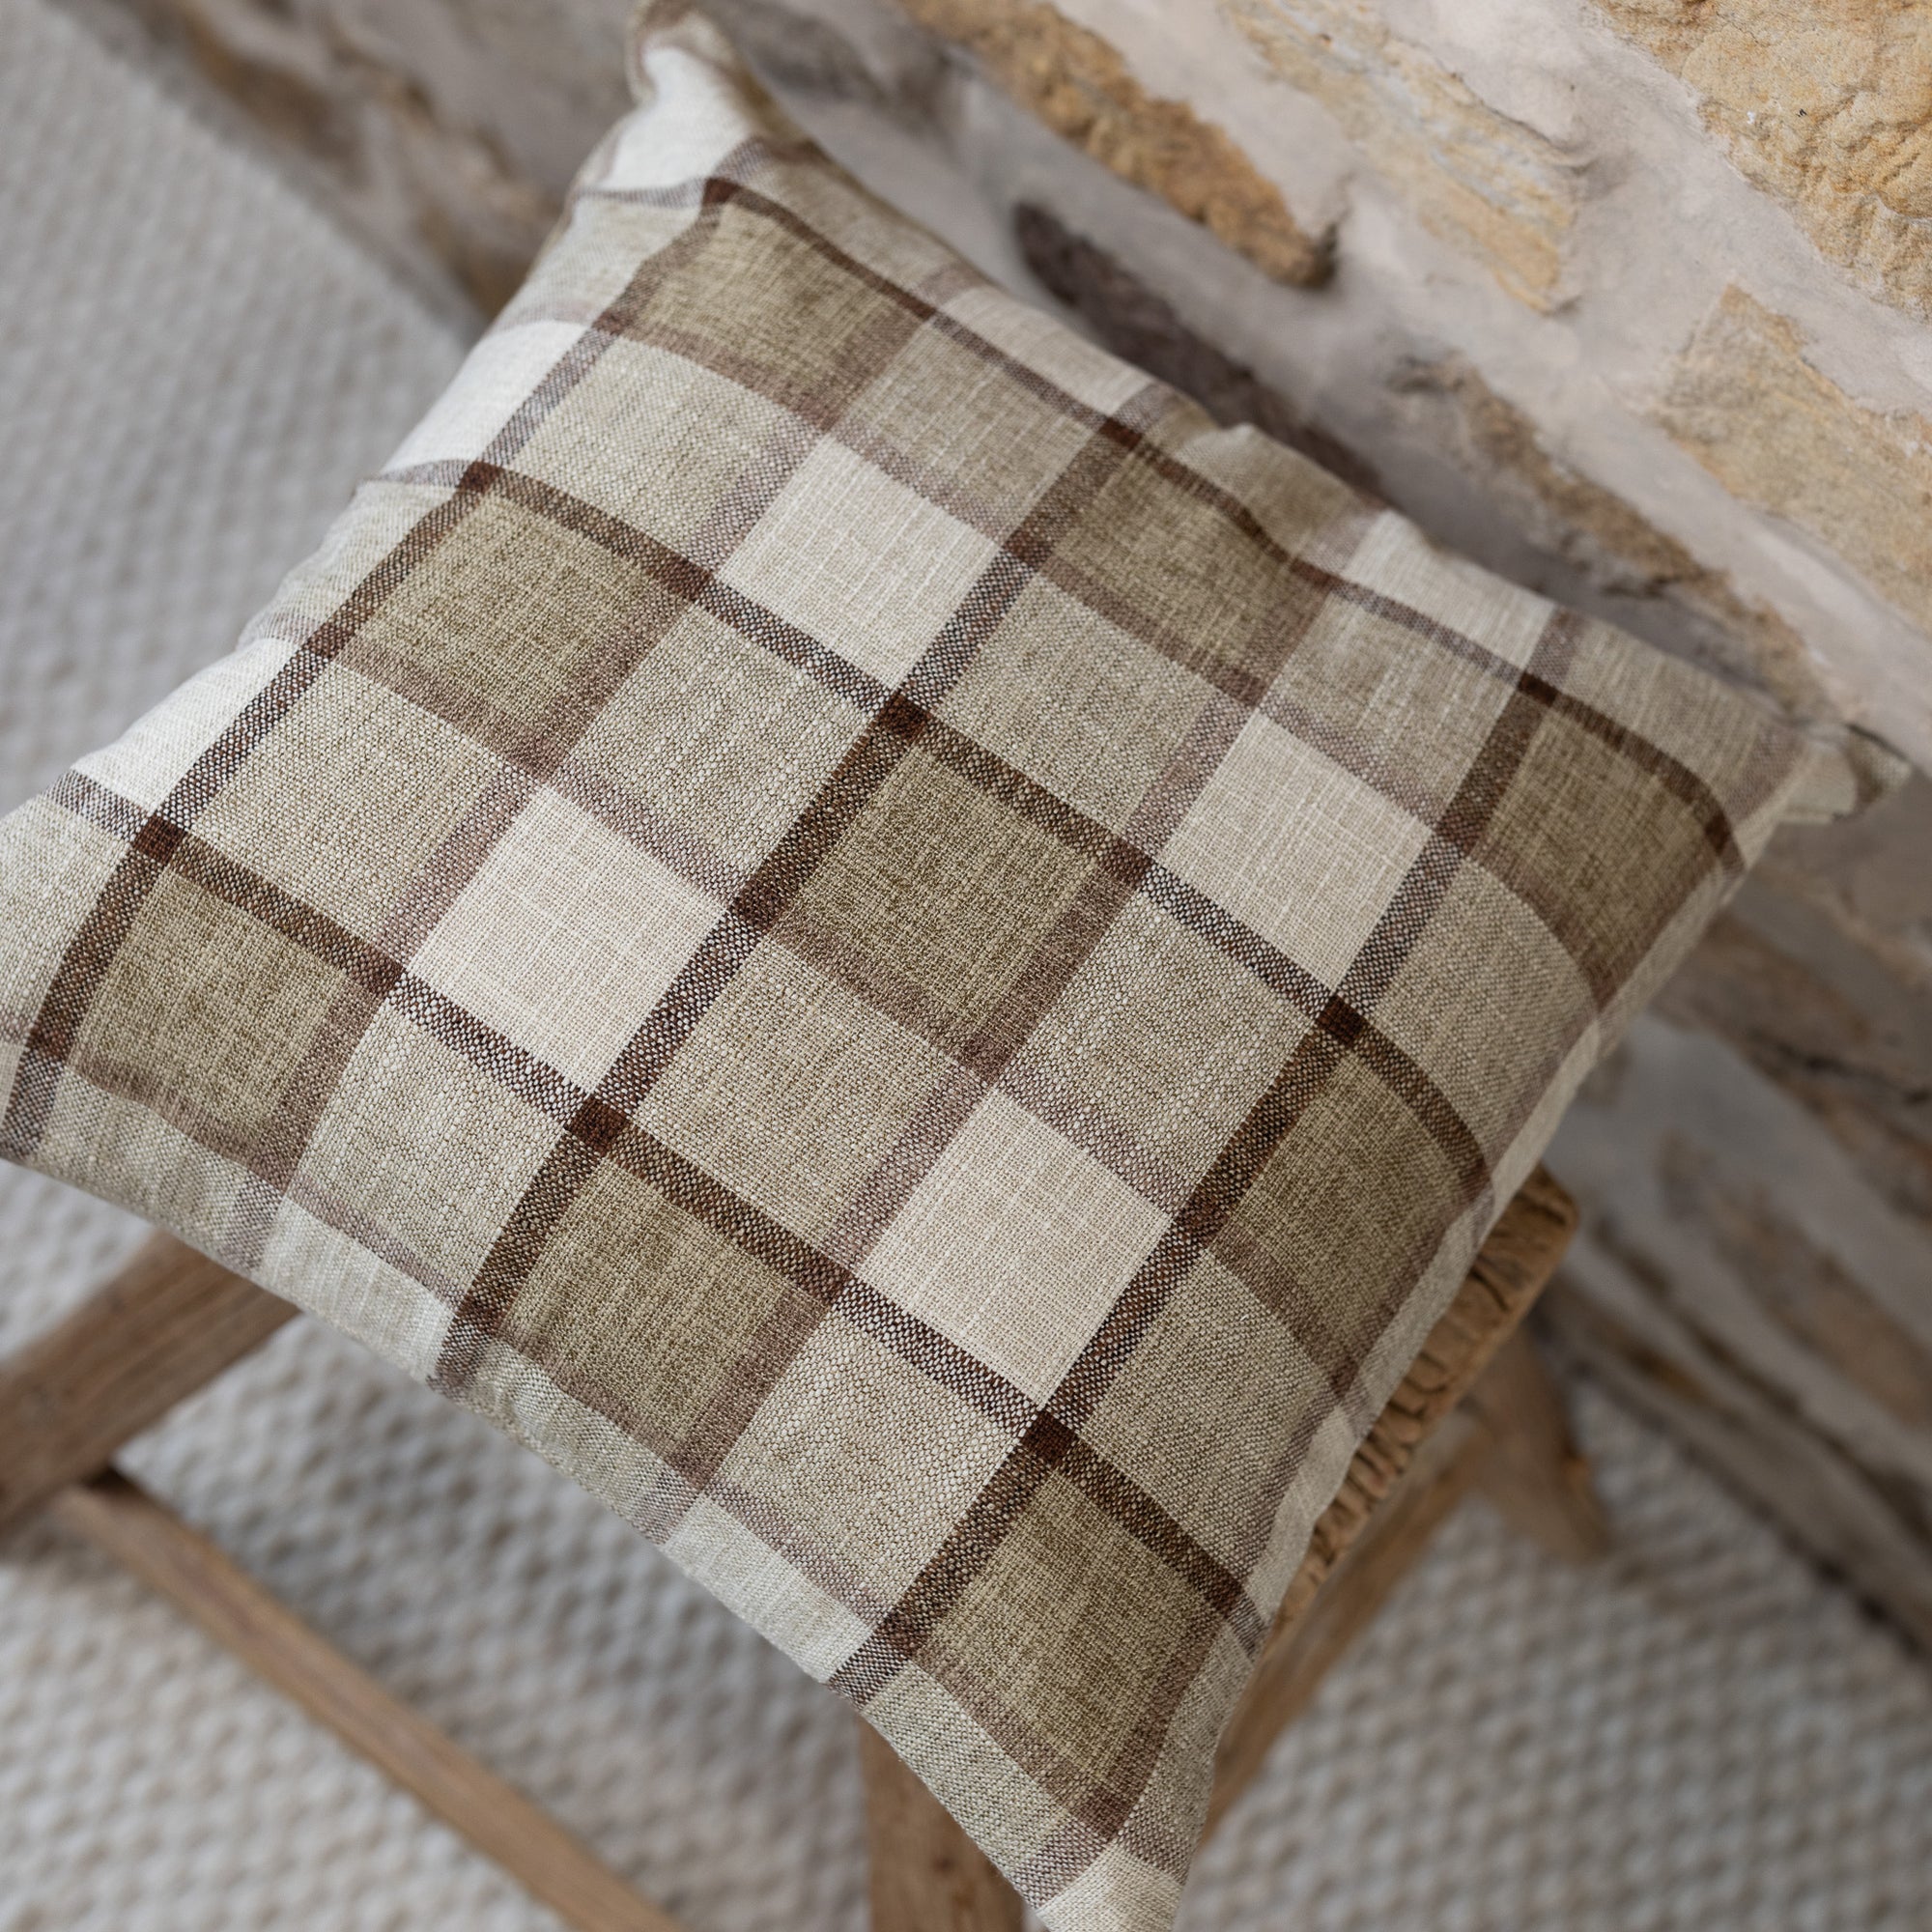 Brown and cream checkered cushion on wooden stool.